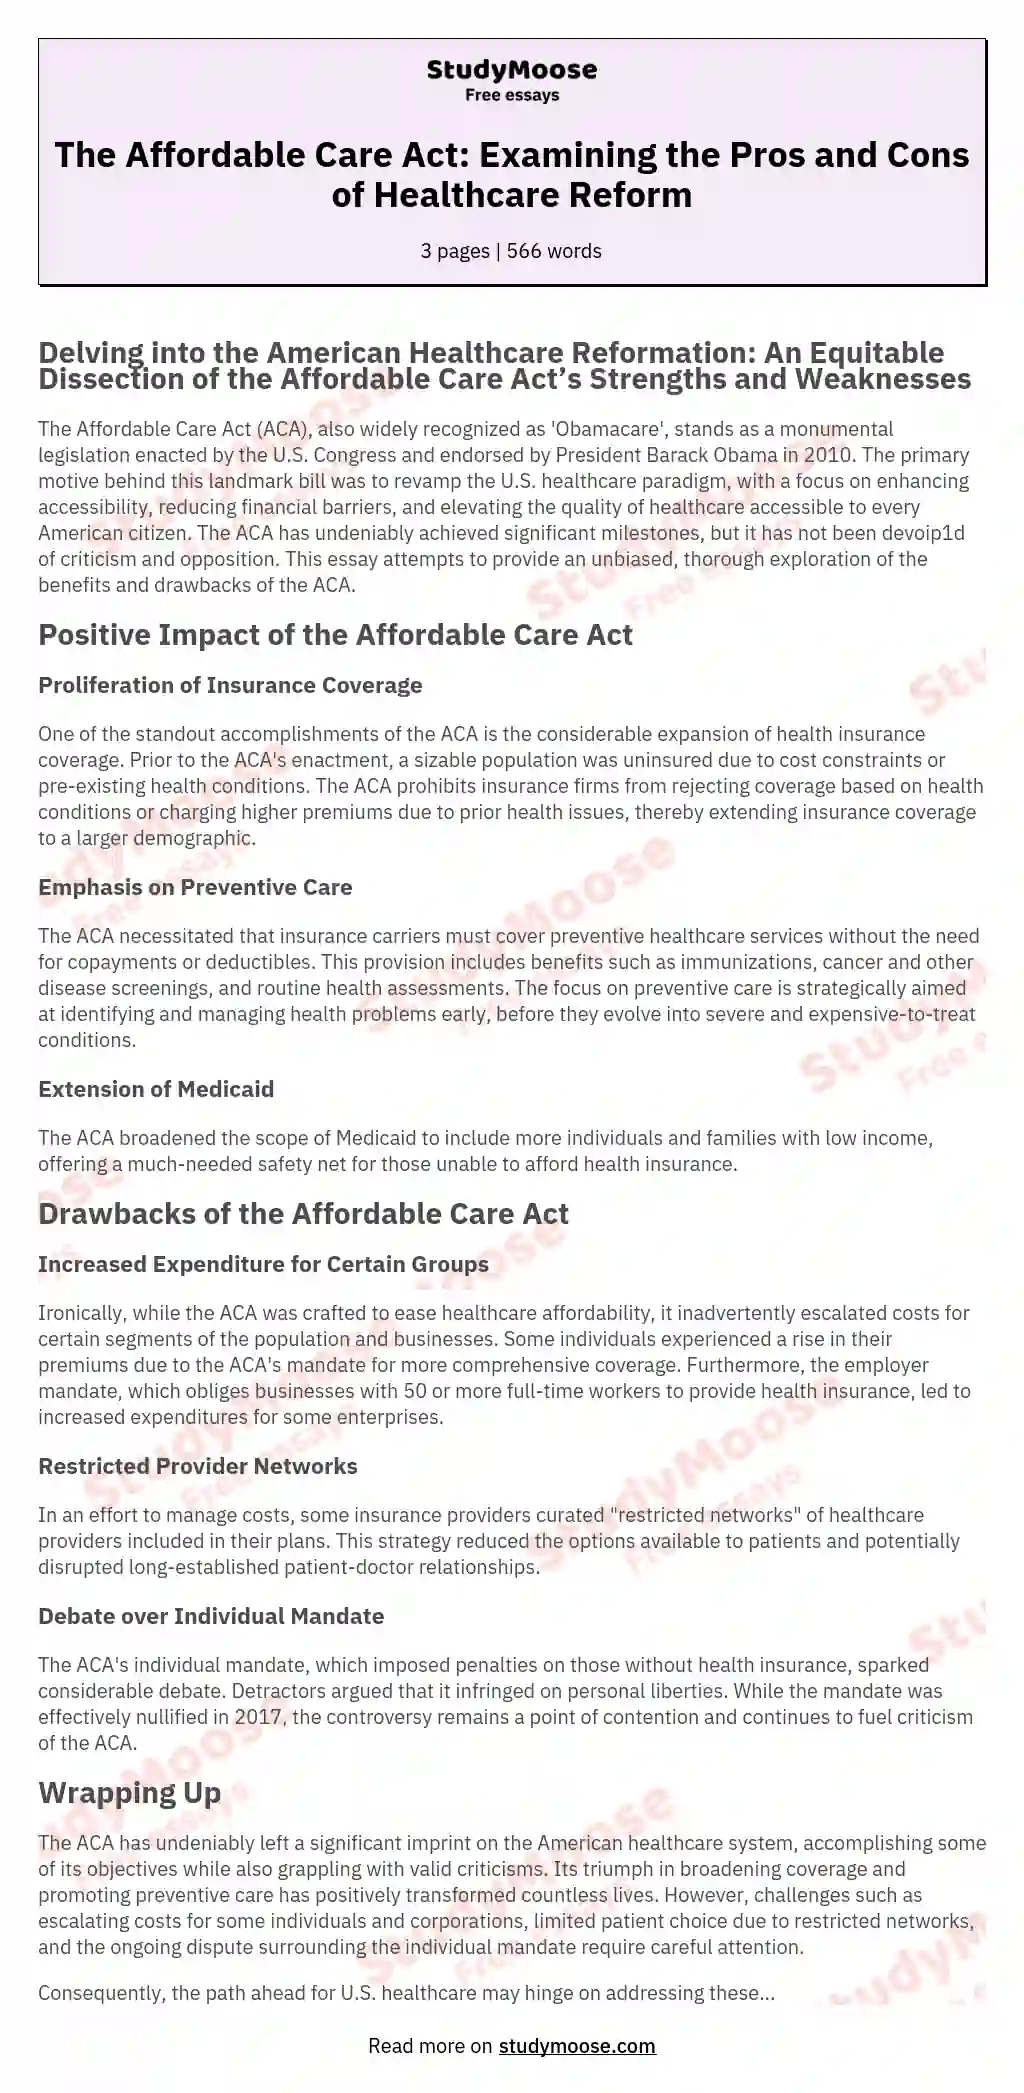 The Affordable Care Act: Examining the Pros and Cons of Healthcare Reform essay